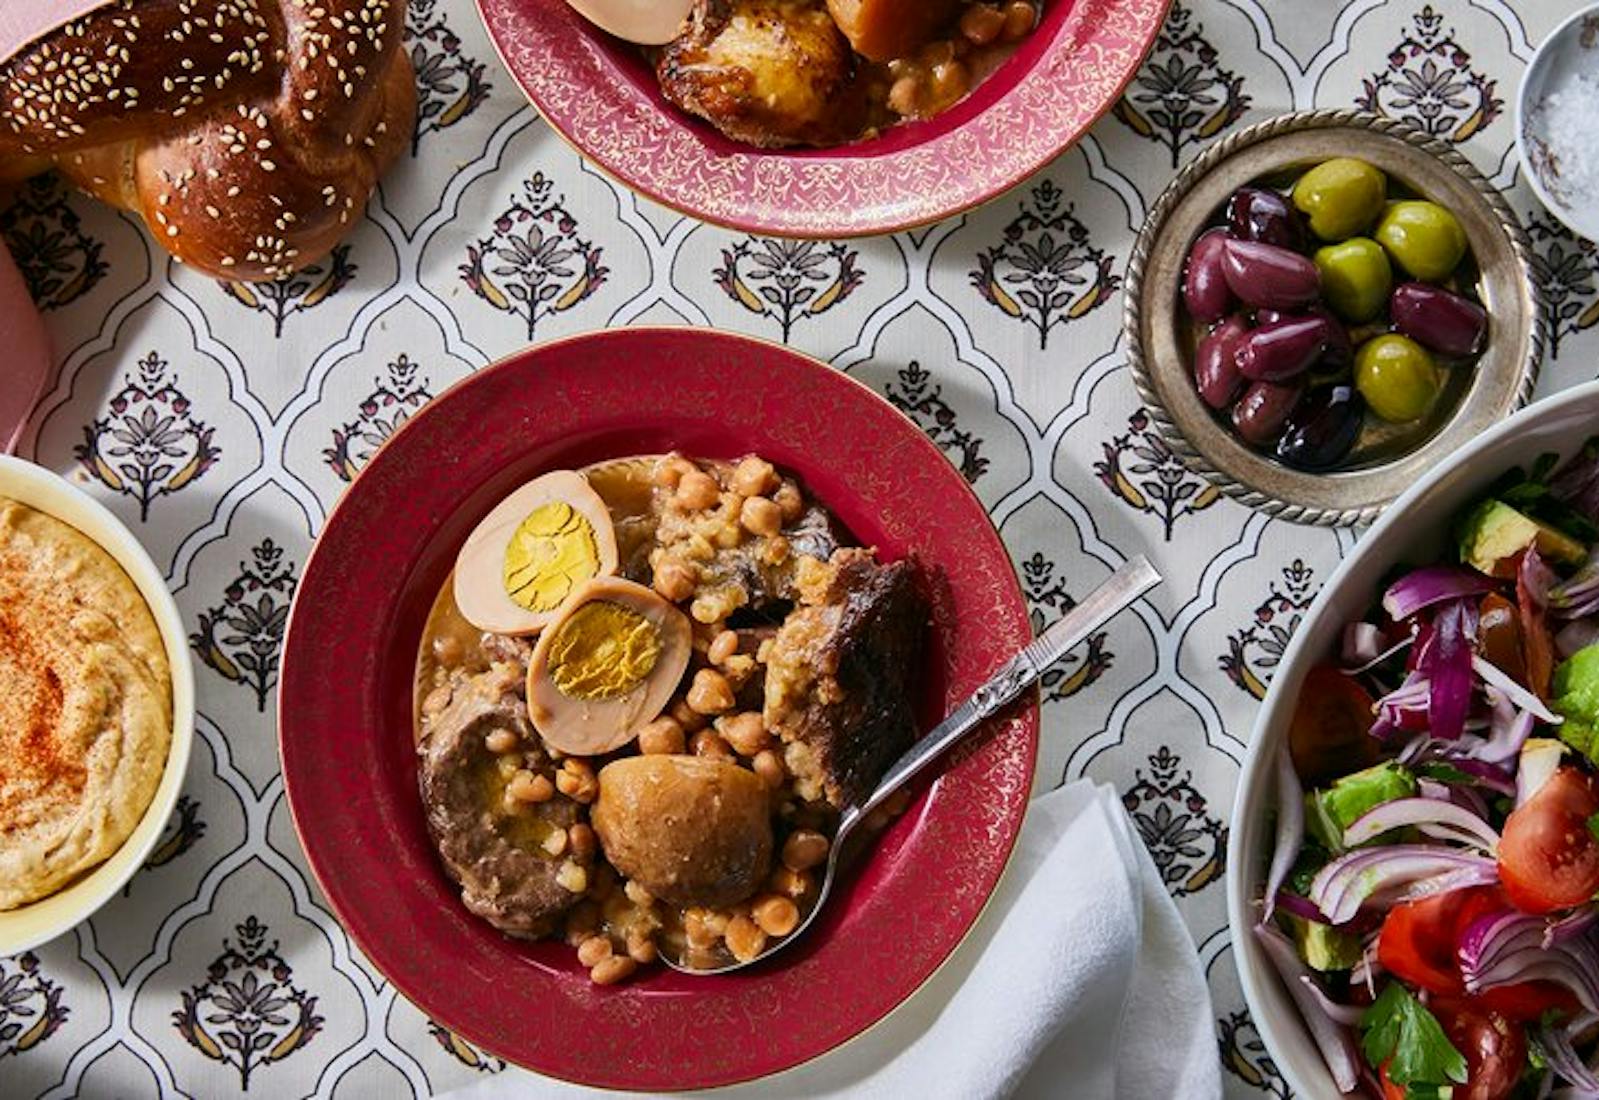 Cholent with sides of green salad, olives, hummus and challah.